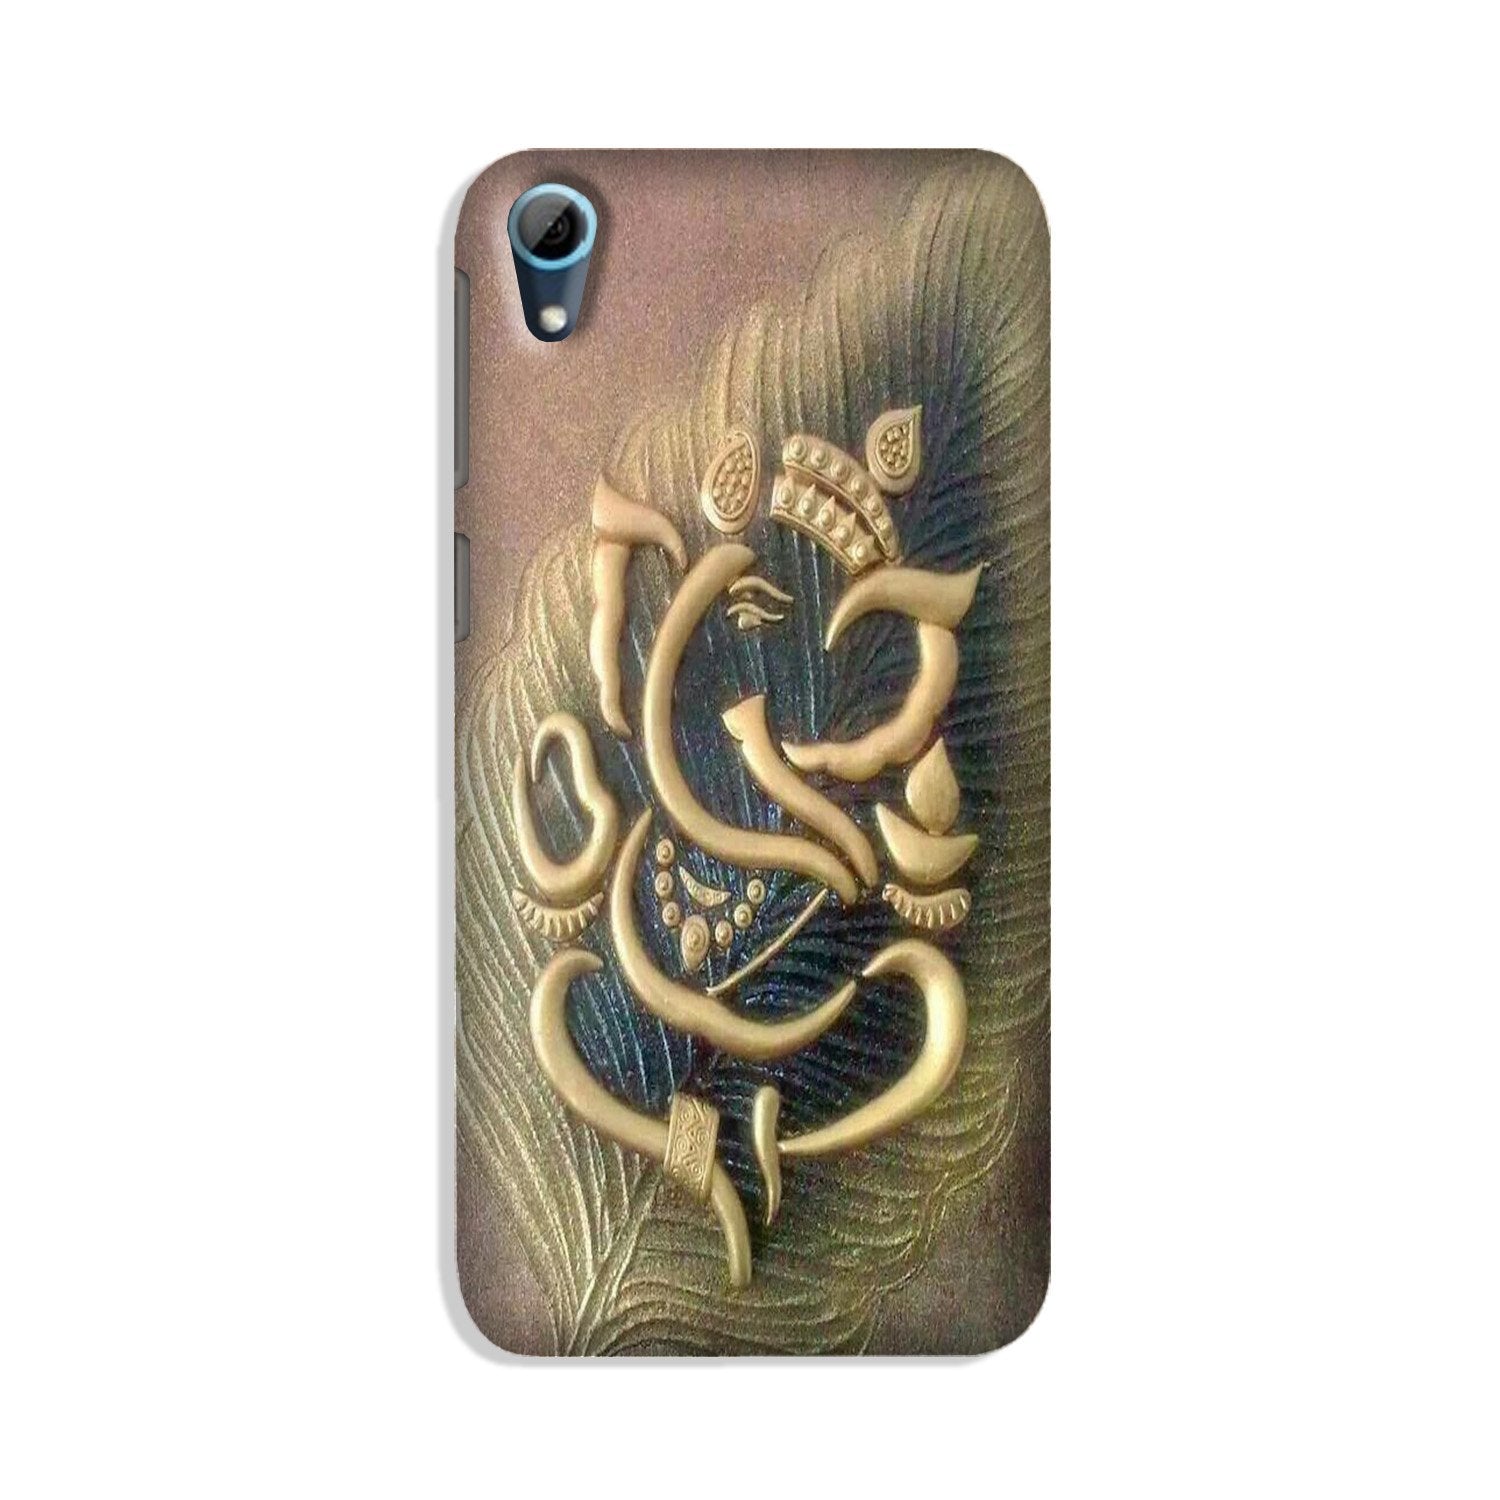 Lord Ganesha Case for HTC Desire 826